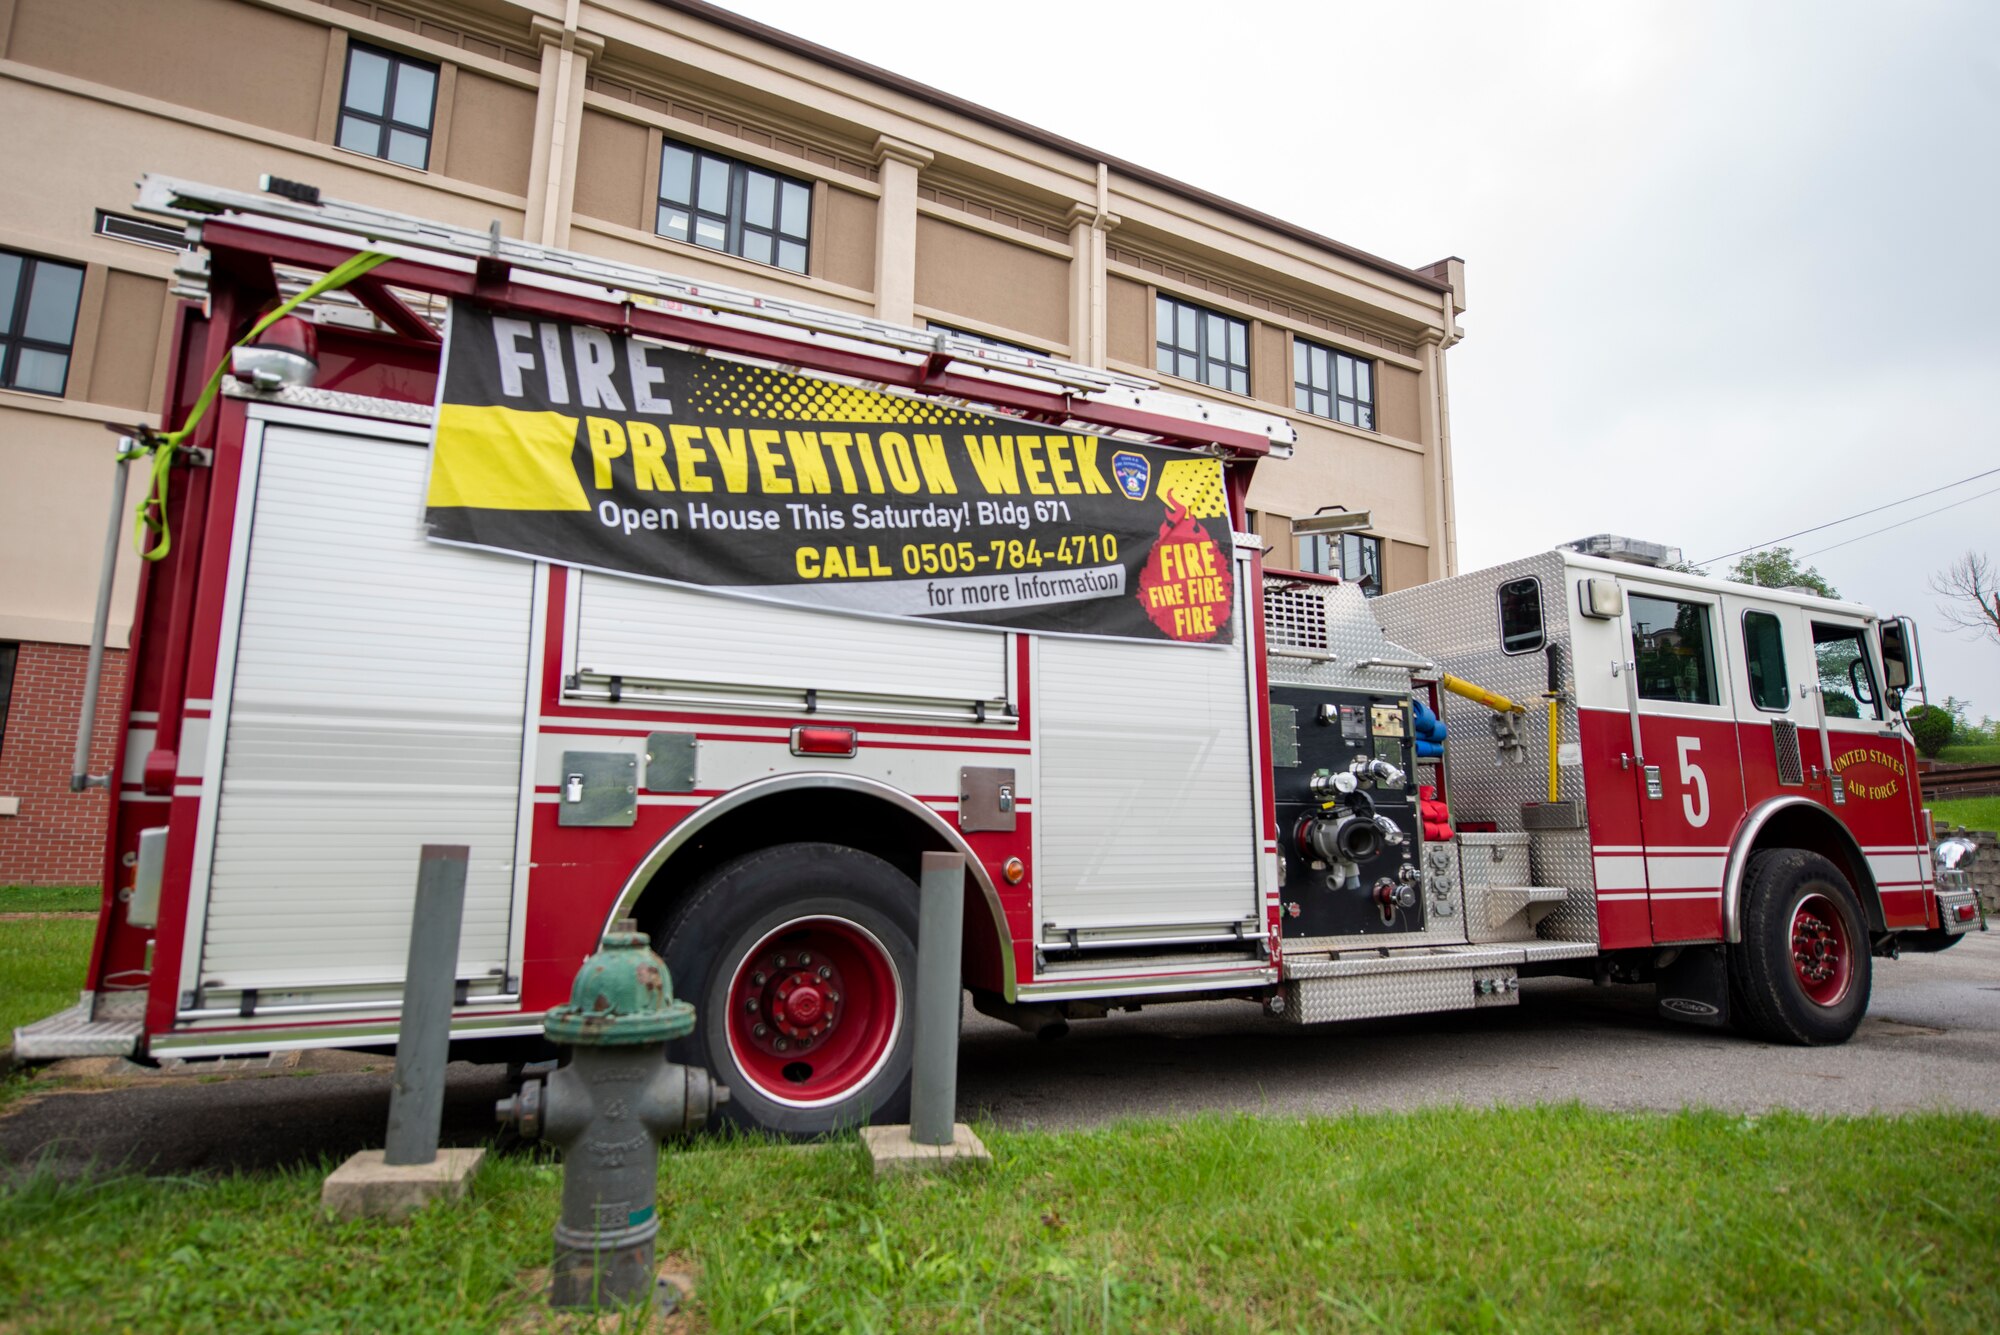 51st Civil Engineer Squadron firemen display one of their firetrucks for Osan Air Base families during the Fire Prevention Week Kids’ Showcase